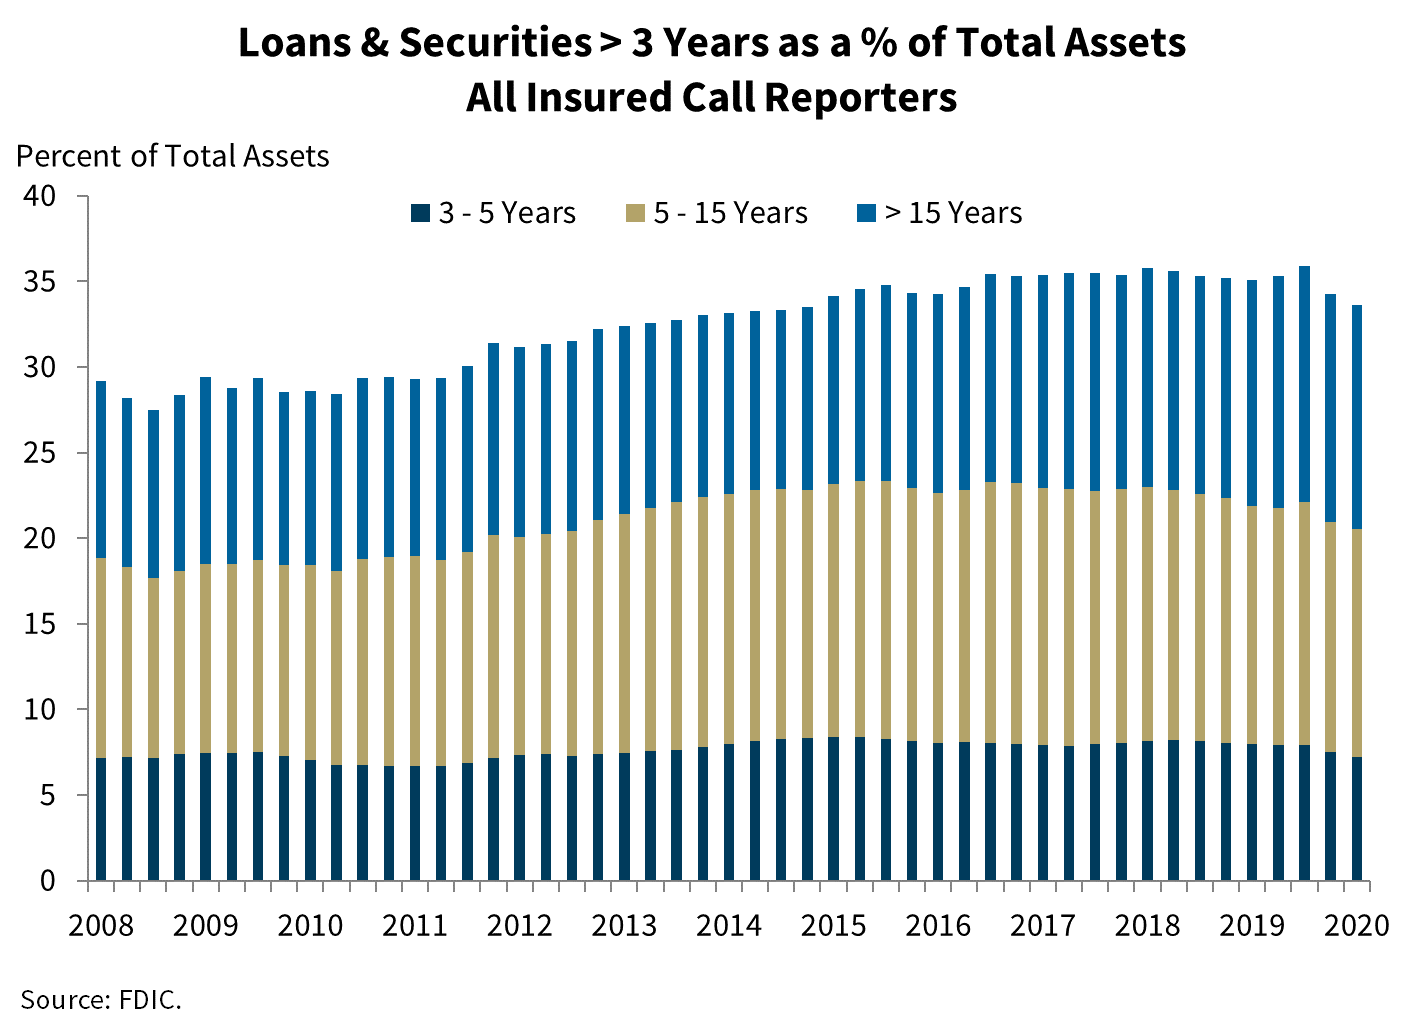 Chart 4: Loans & Securities > 3 Years as a % Total Assets All Insured Call Reporters